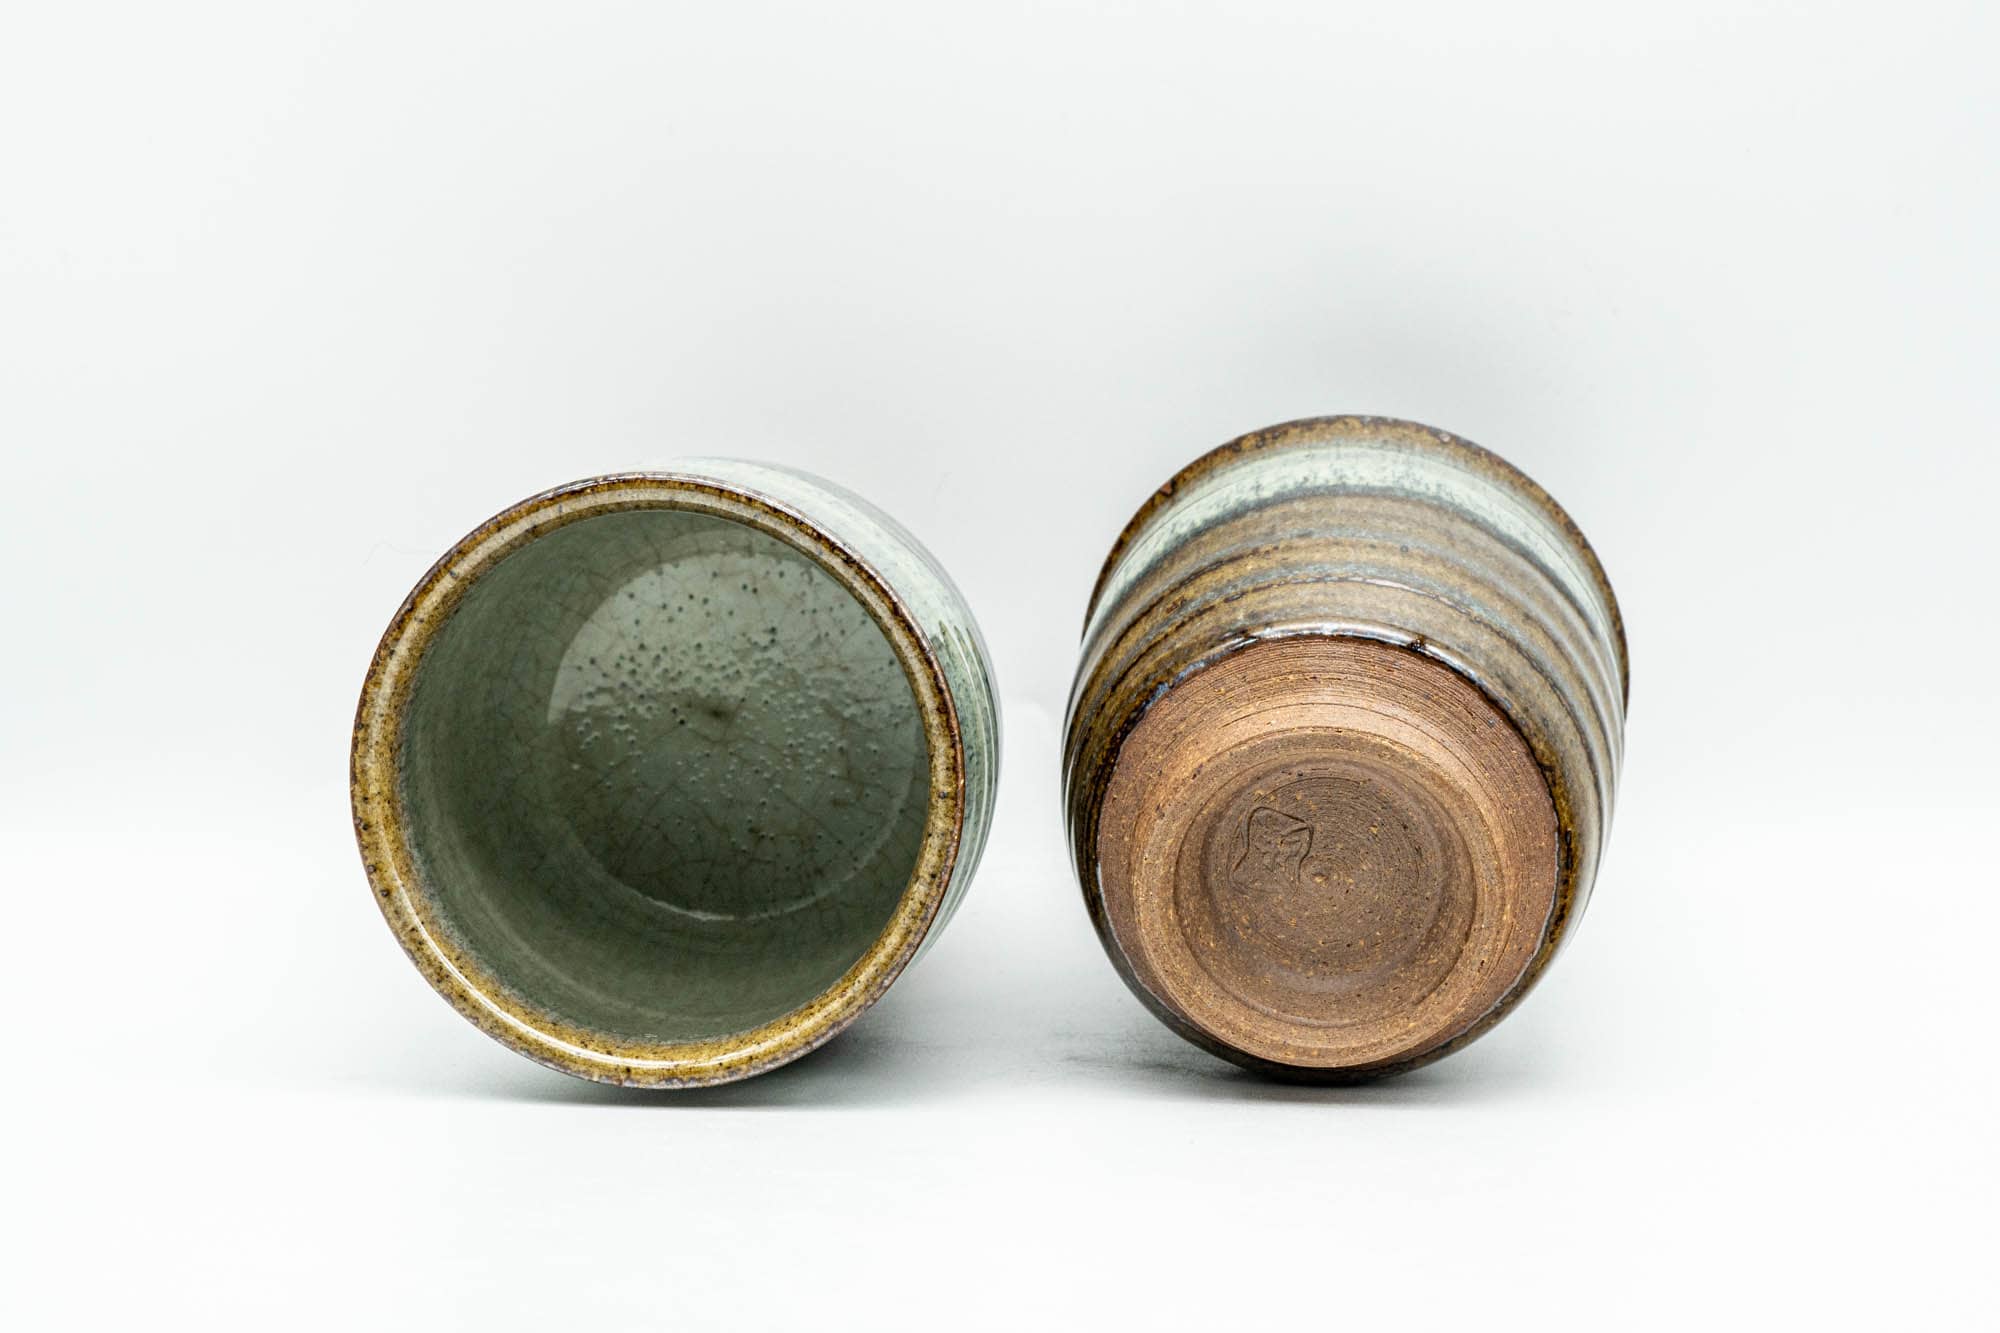 Japanese Teacups - Pair of Beige Hare's Fur Drip-Glazed Lidded Meoto Yunomi with Wooden Box